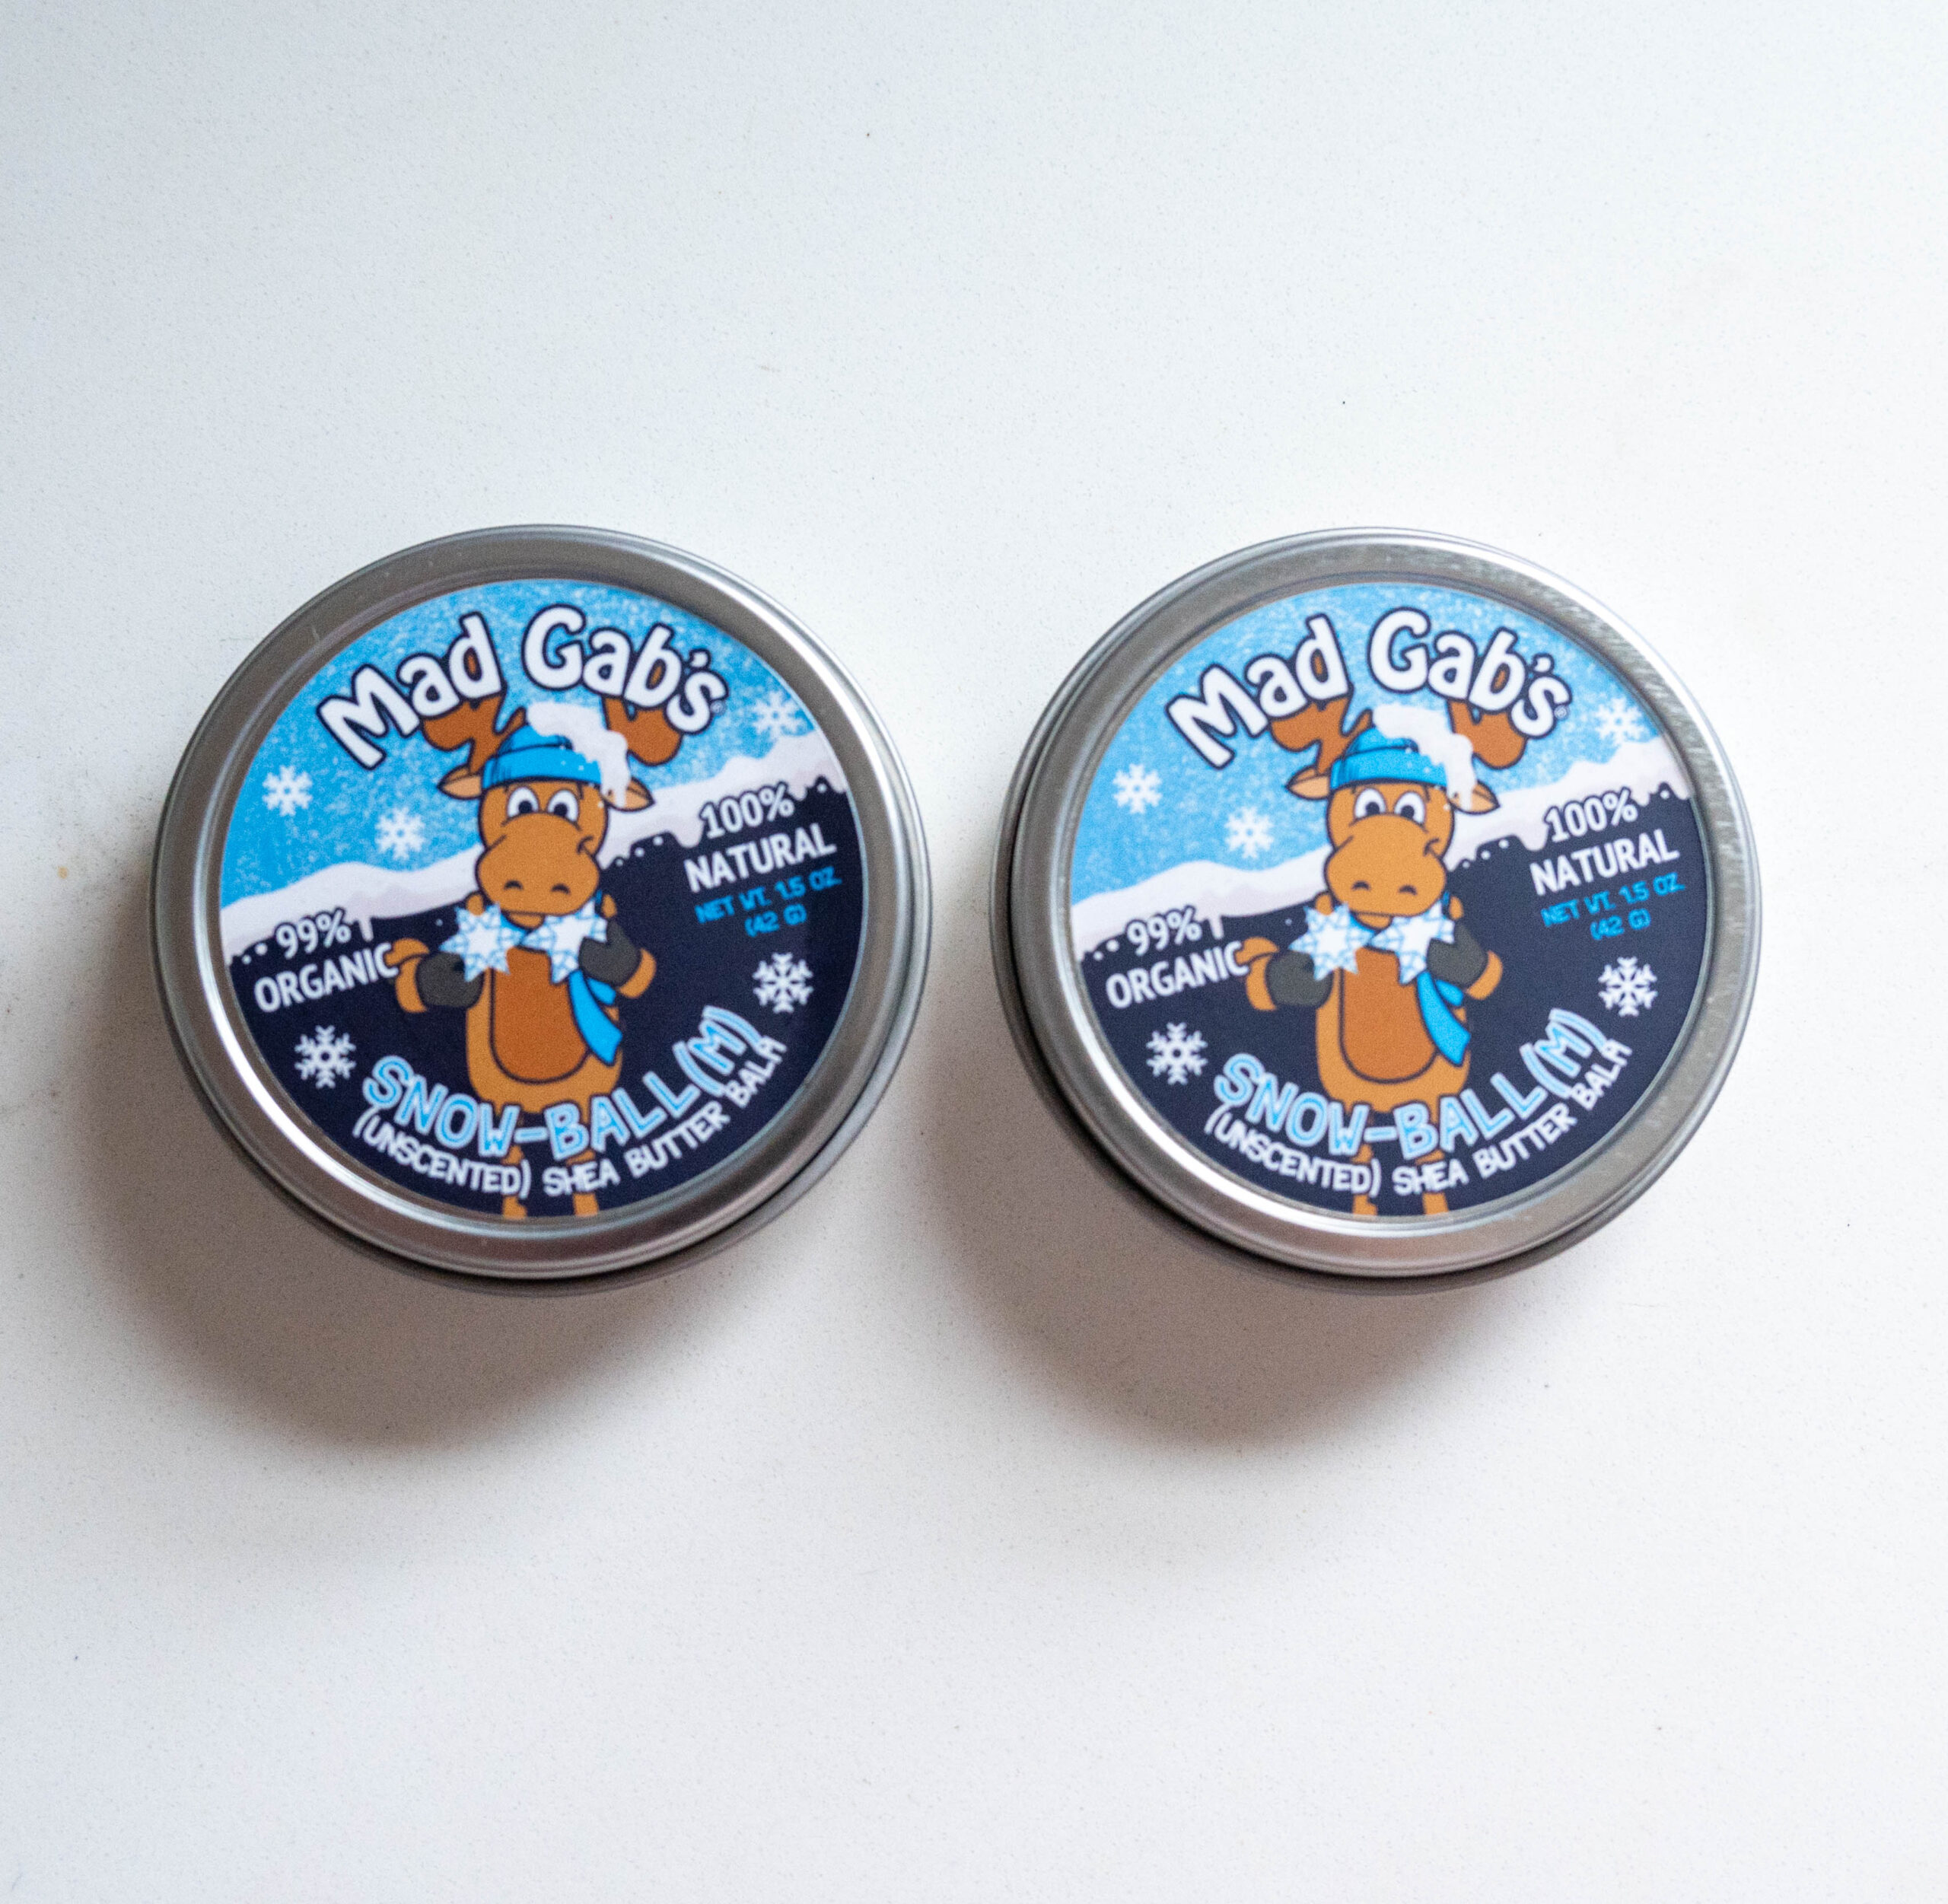 Mad Gab’s Unscented Snow-Ball Balms 2-Pack